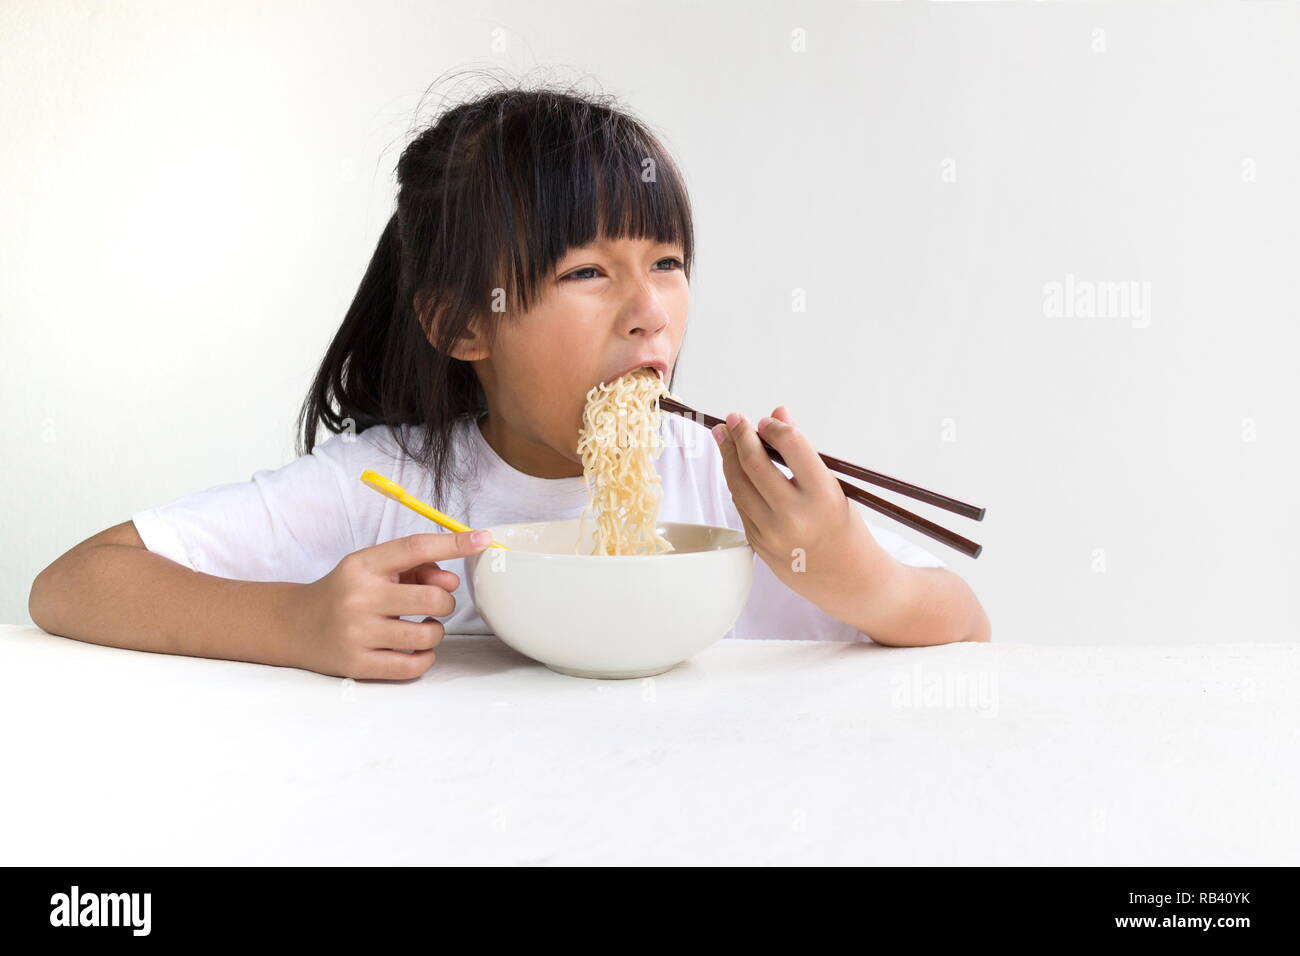 Portrait of Asian child girl eating instant noodles with white wooden table and white background. Stock Photo